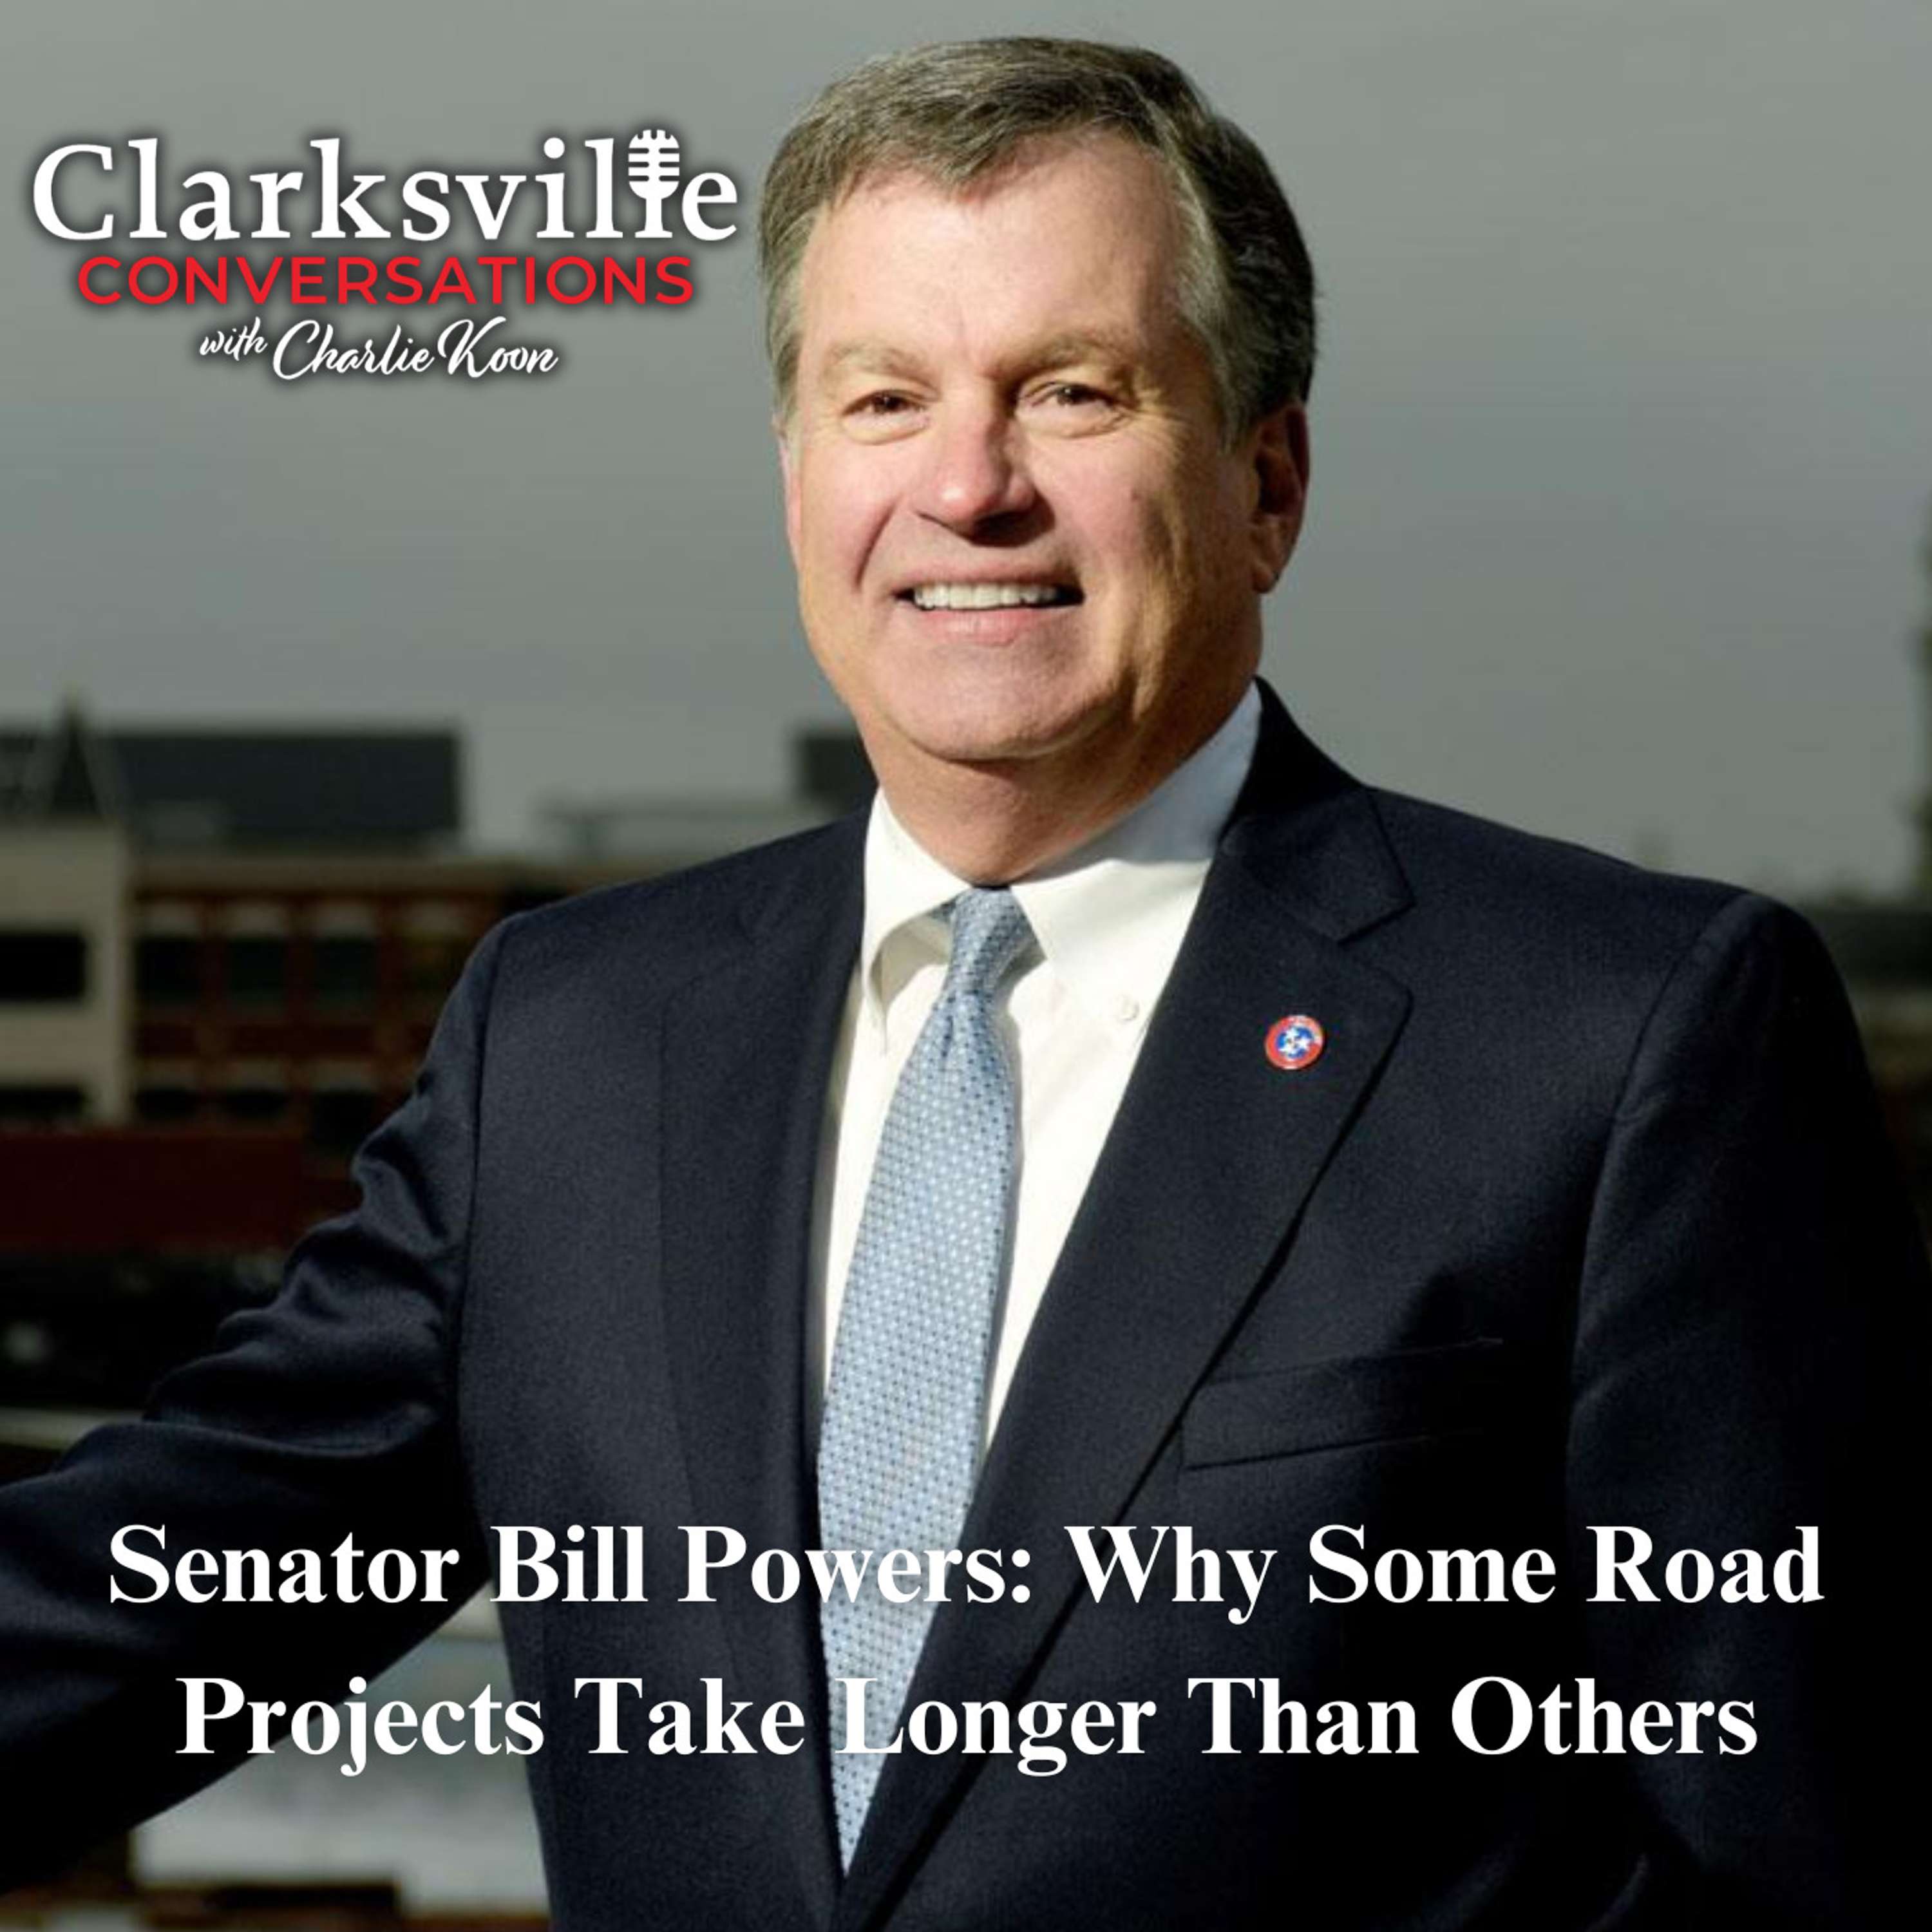 Senator Bill Powers:  Why Some Road Projects Take Longer Than Others